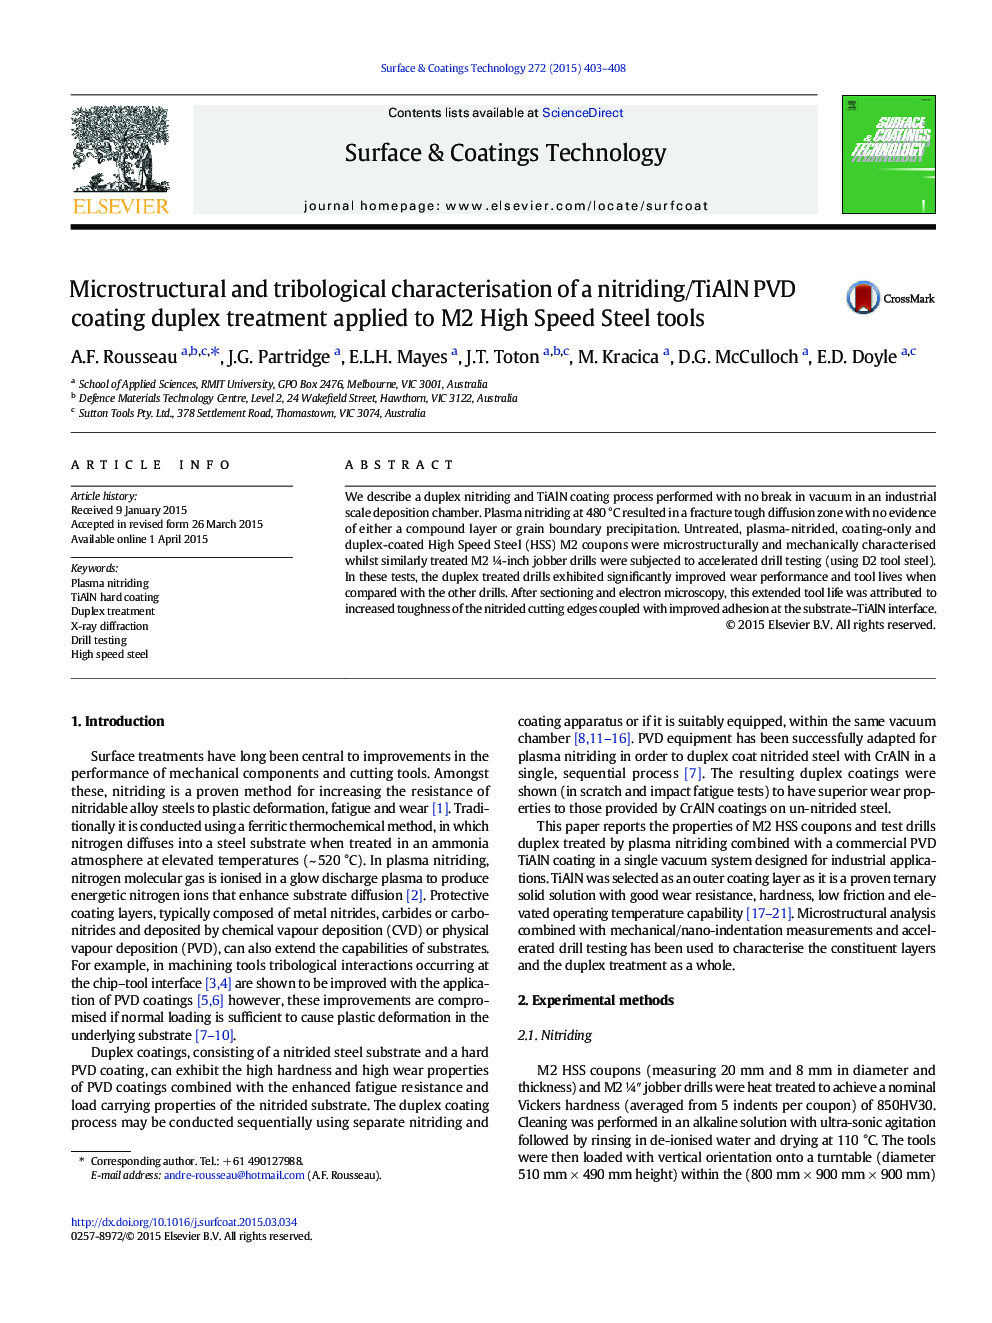 Microstructural and tribological characterisation of a nitriding/TiAlN PVD coating duplex treatment applied to M2 High Speed Steel tools